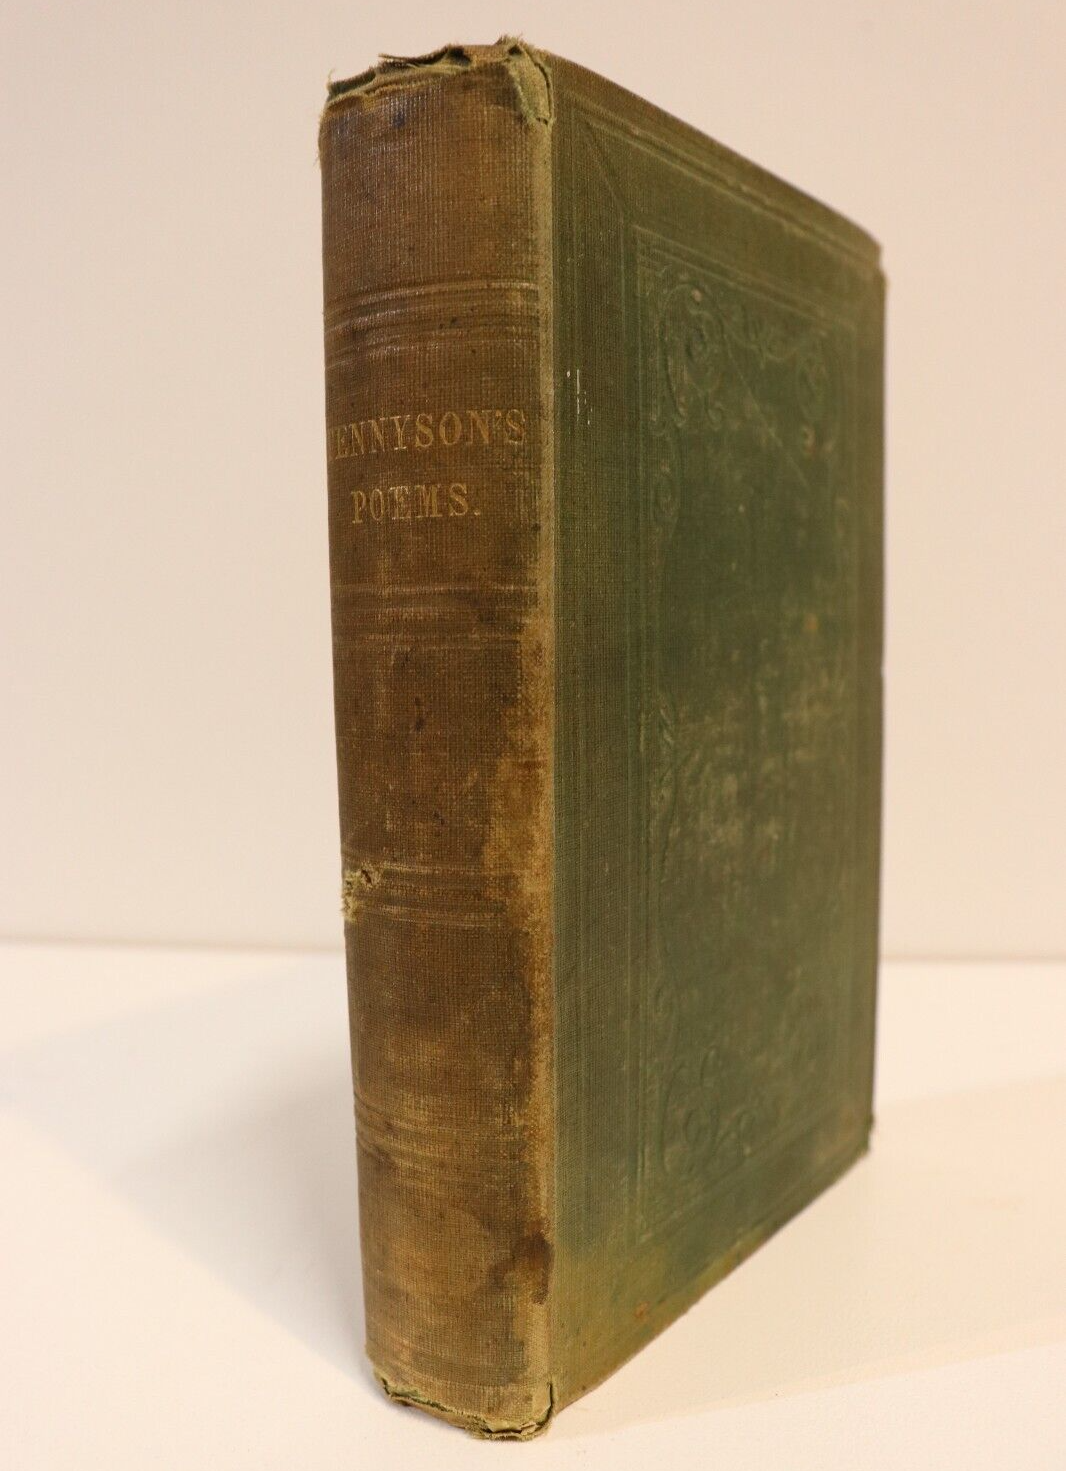 1851 Poems by Alfred Tennyson Antiquarian Poetry Book